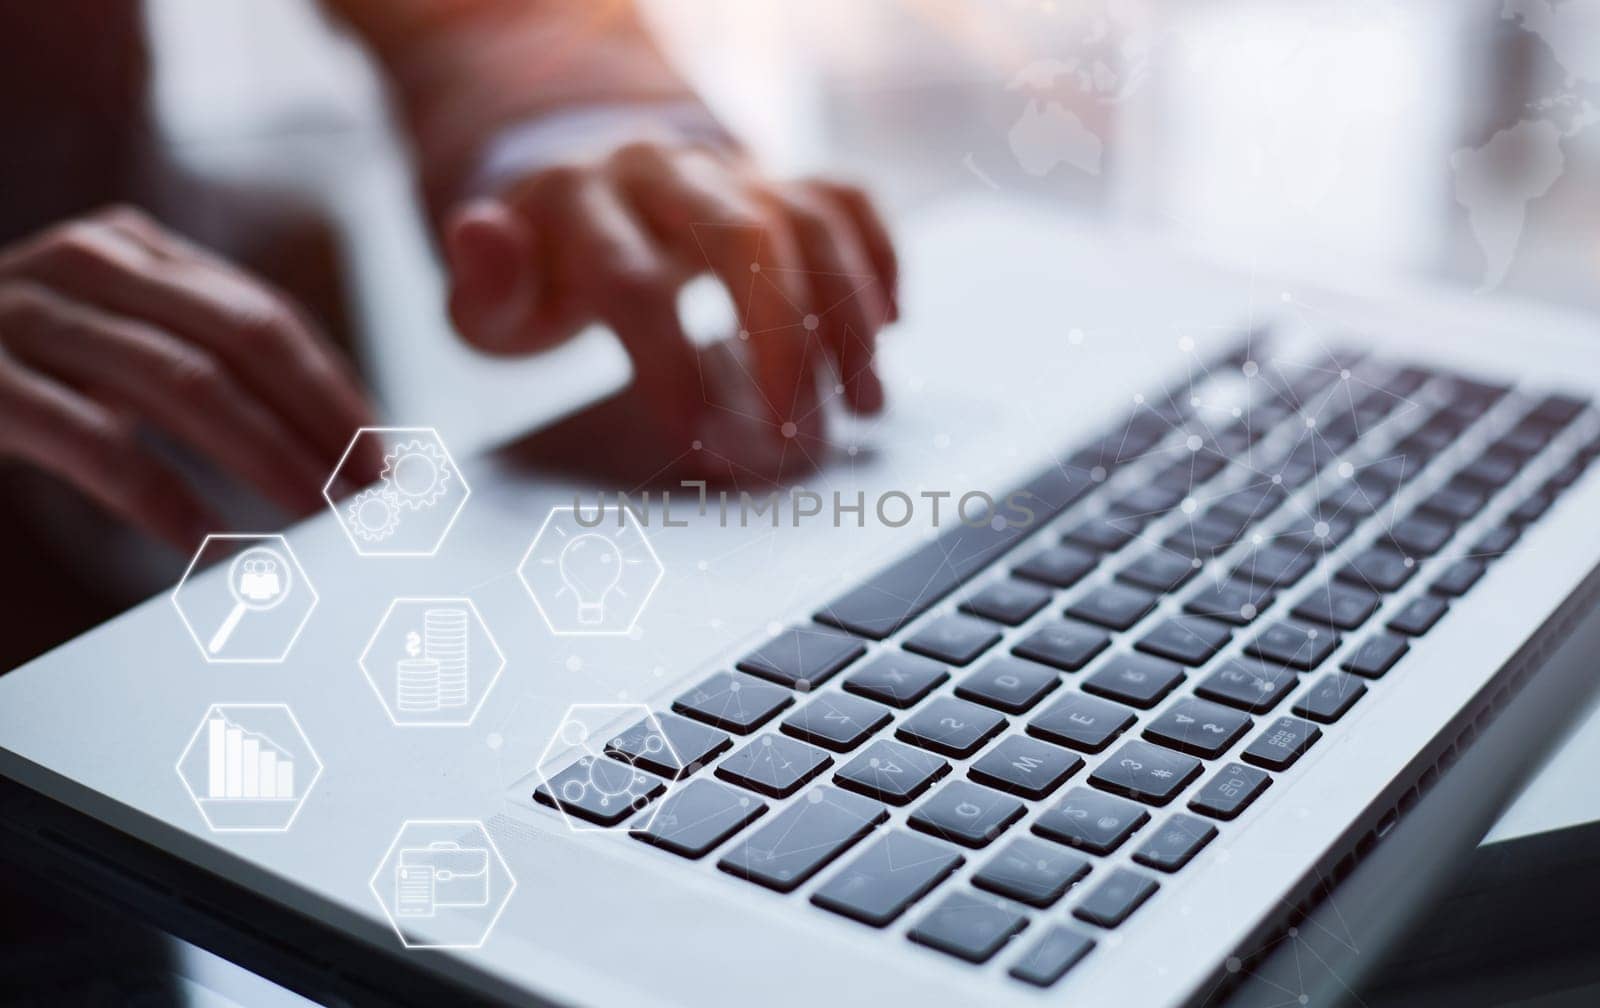 man's hands typing on laptop keyboard in interior